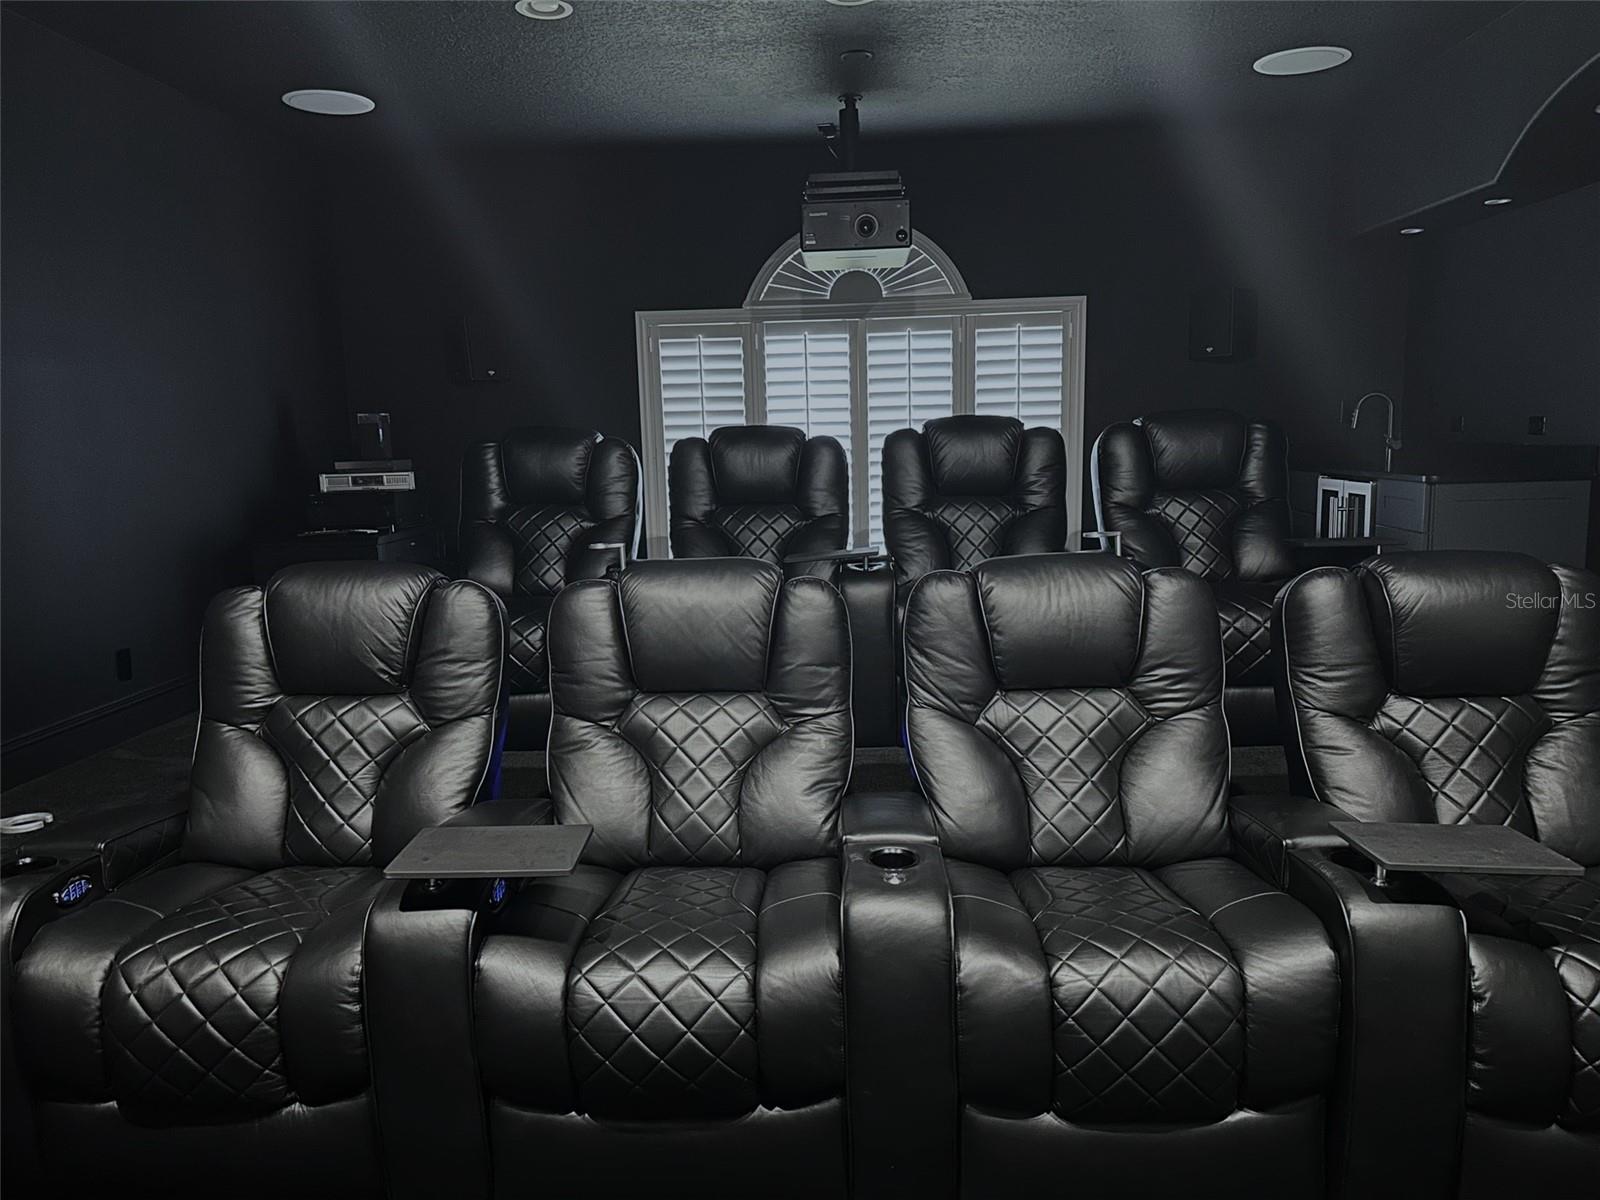 Theater Room Seating